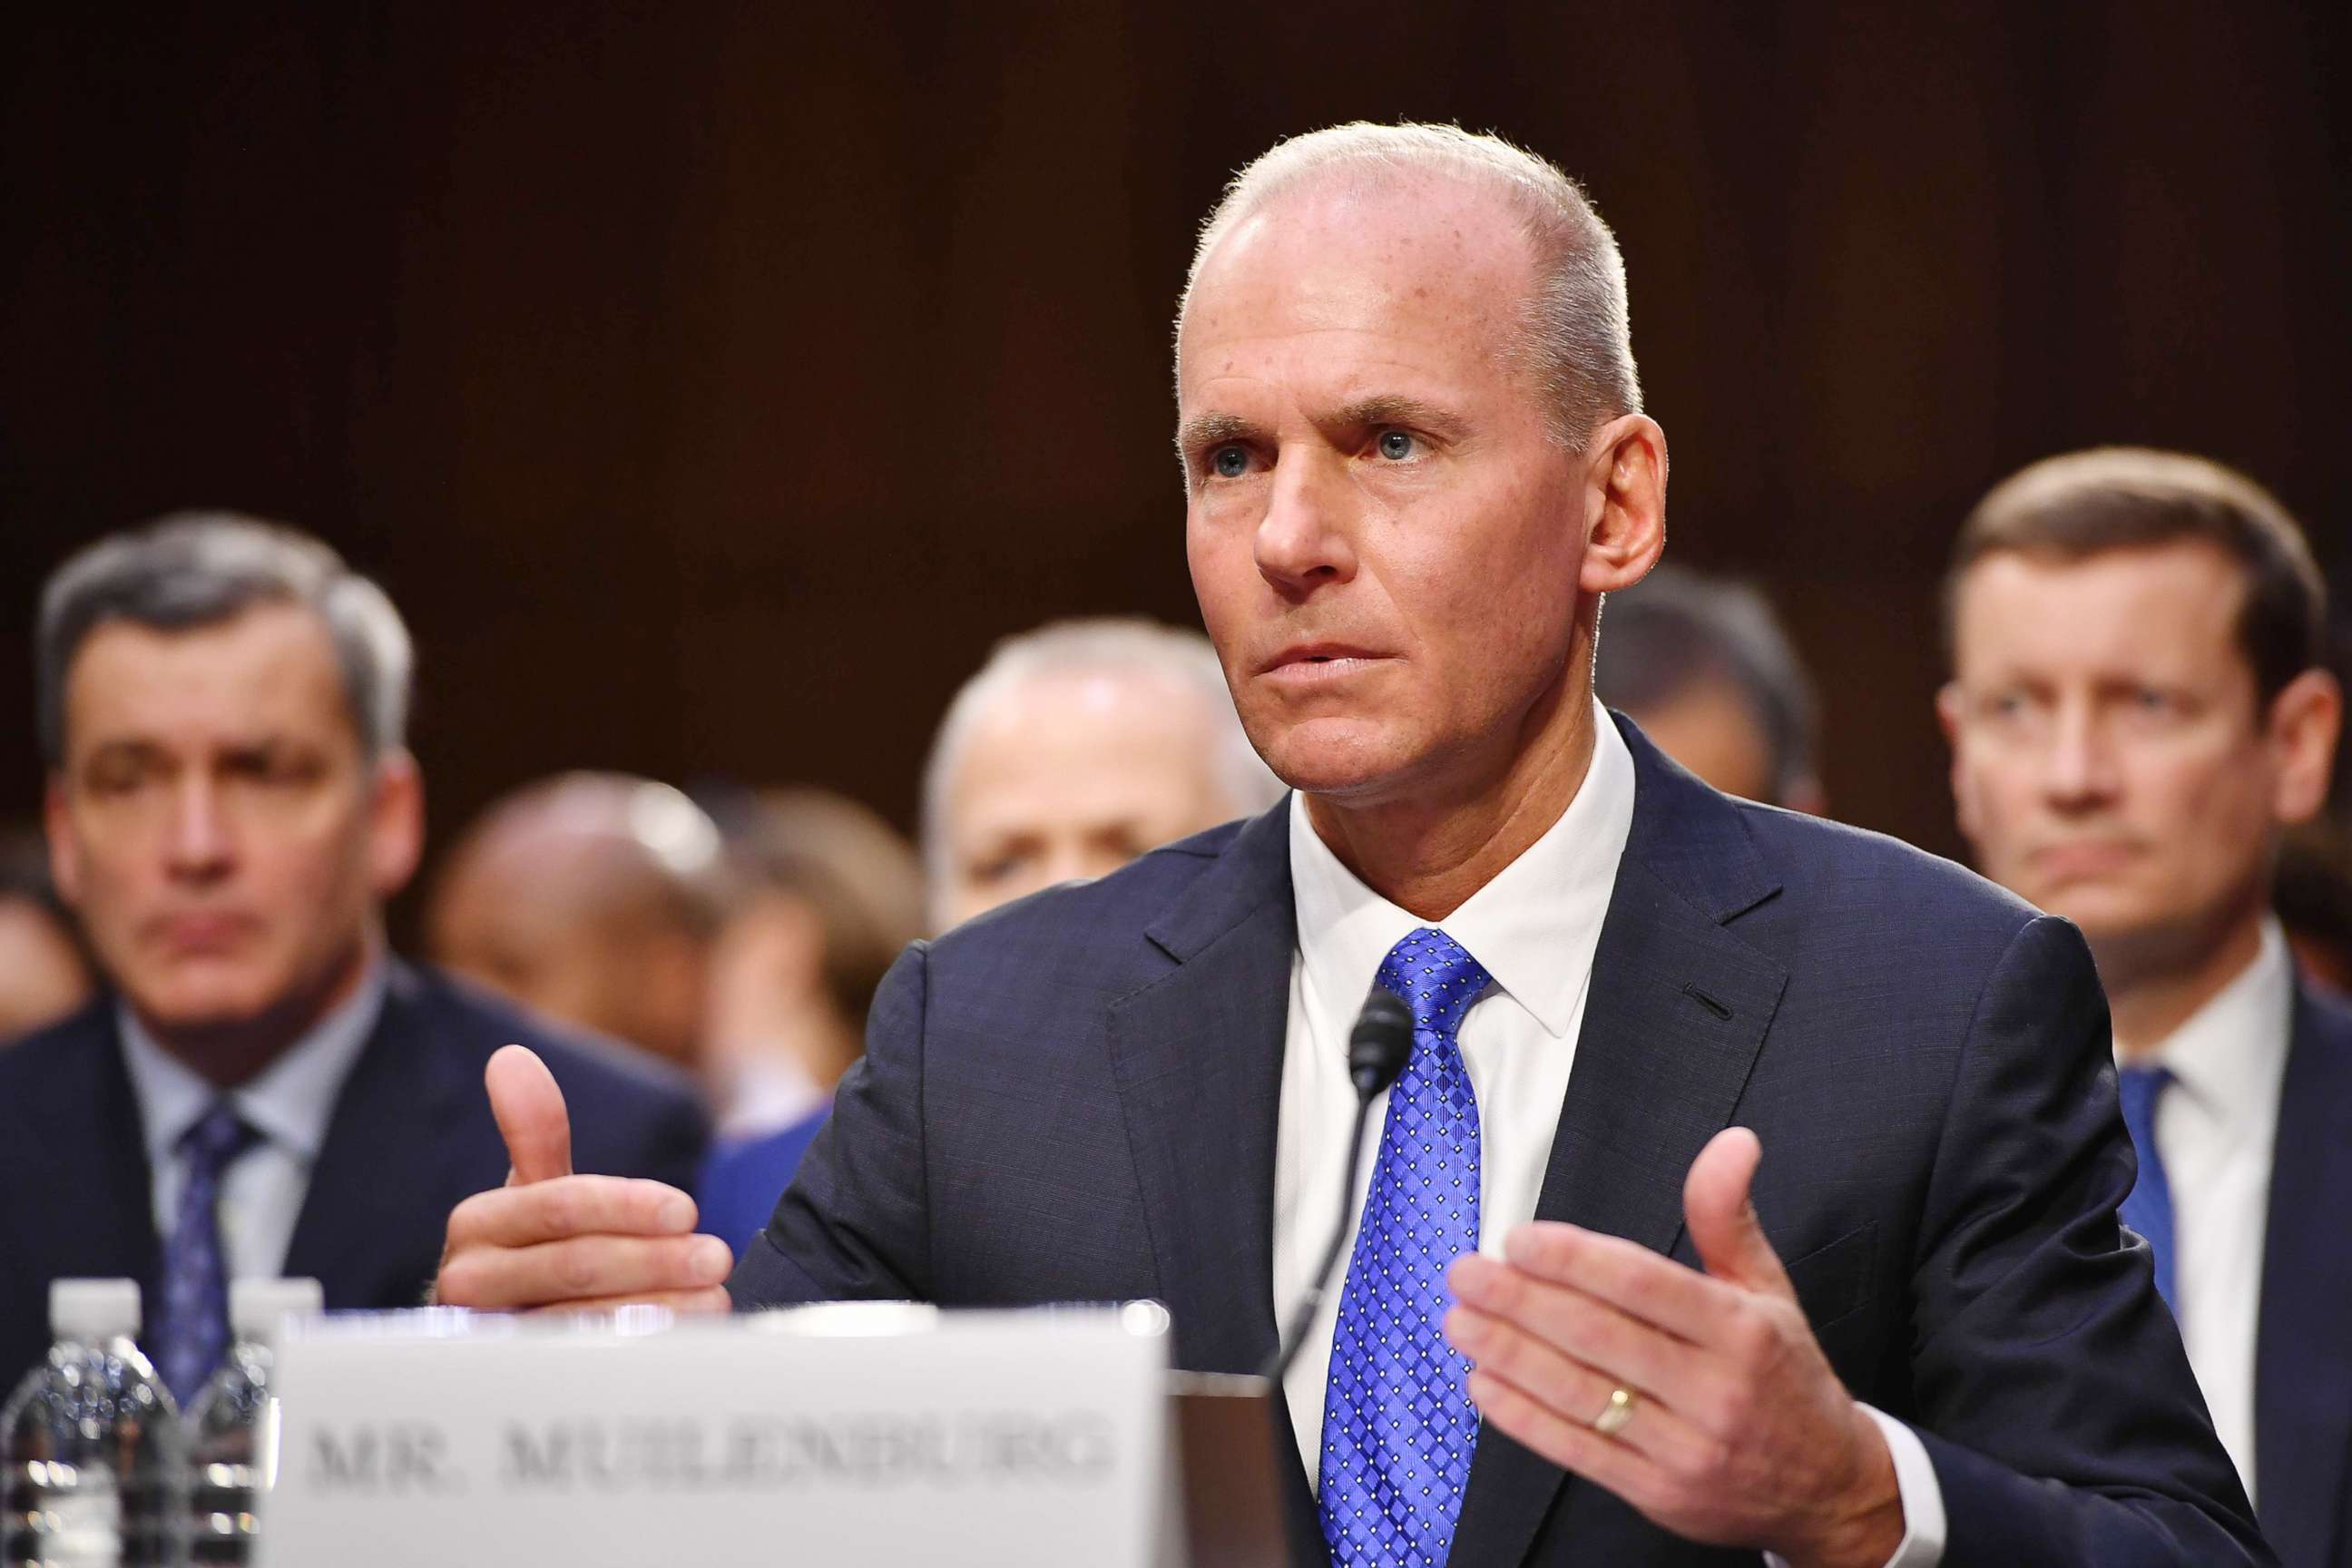 PHOTO: Dennis Muilenburg testifies before the Senate Committee on Commerce, Science, and Transportation on Aviation Safety and the Future of Boeings 737 MAX in the Hart Senate Office Building on Capitol Hill in Washington, D.C., Oct. 29, 2019.